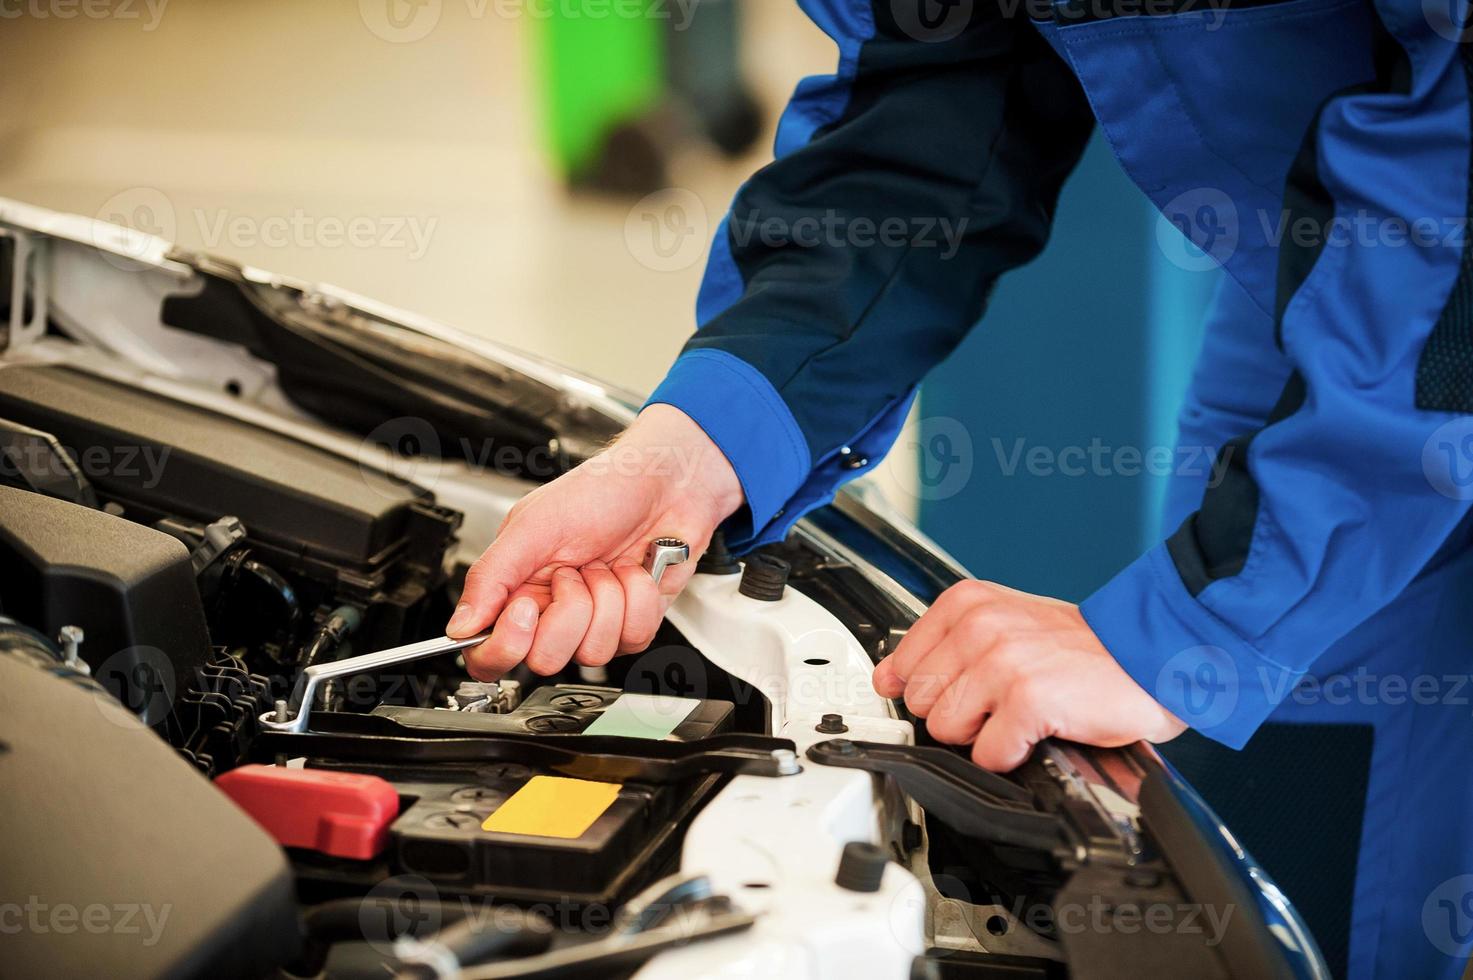 Mechanic at work. Close-up of man in uniform repairing car while standing in workshop photo